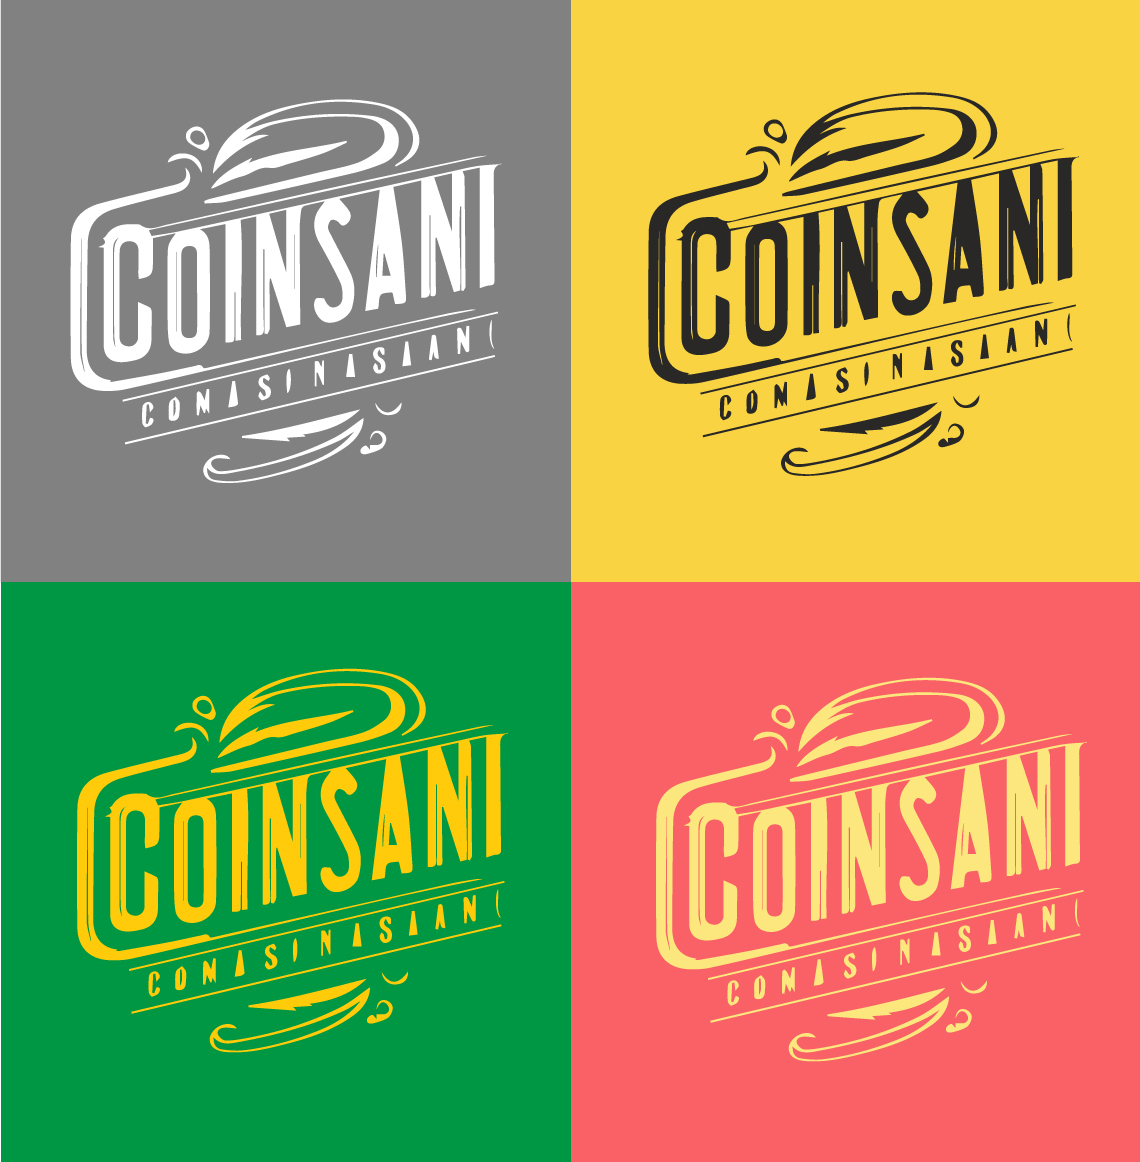 Four different logos for consani.